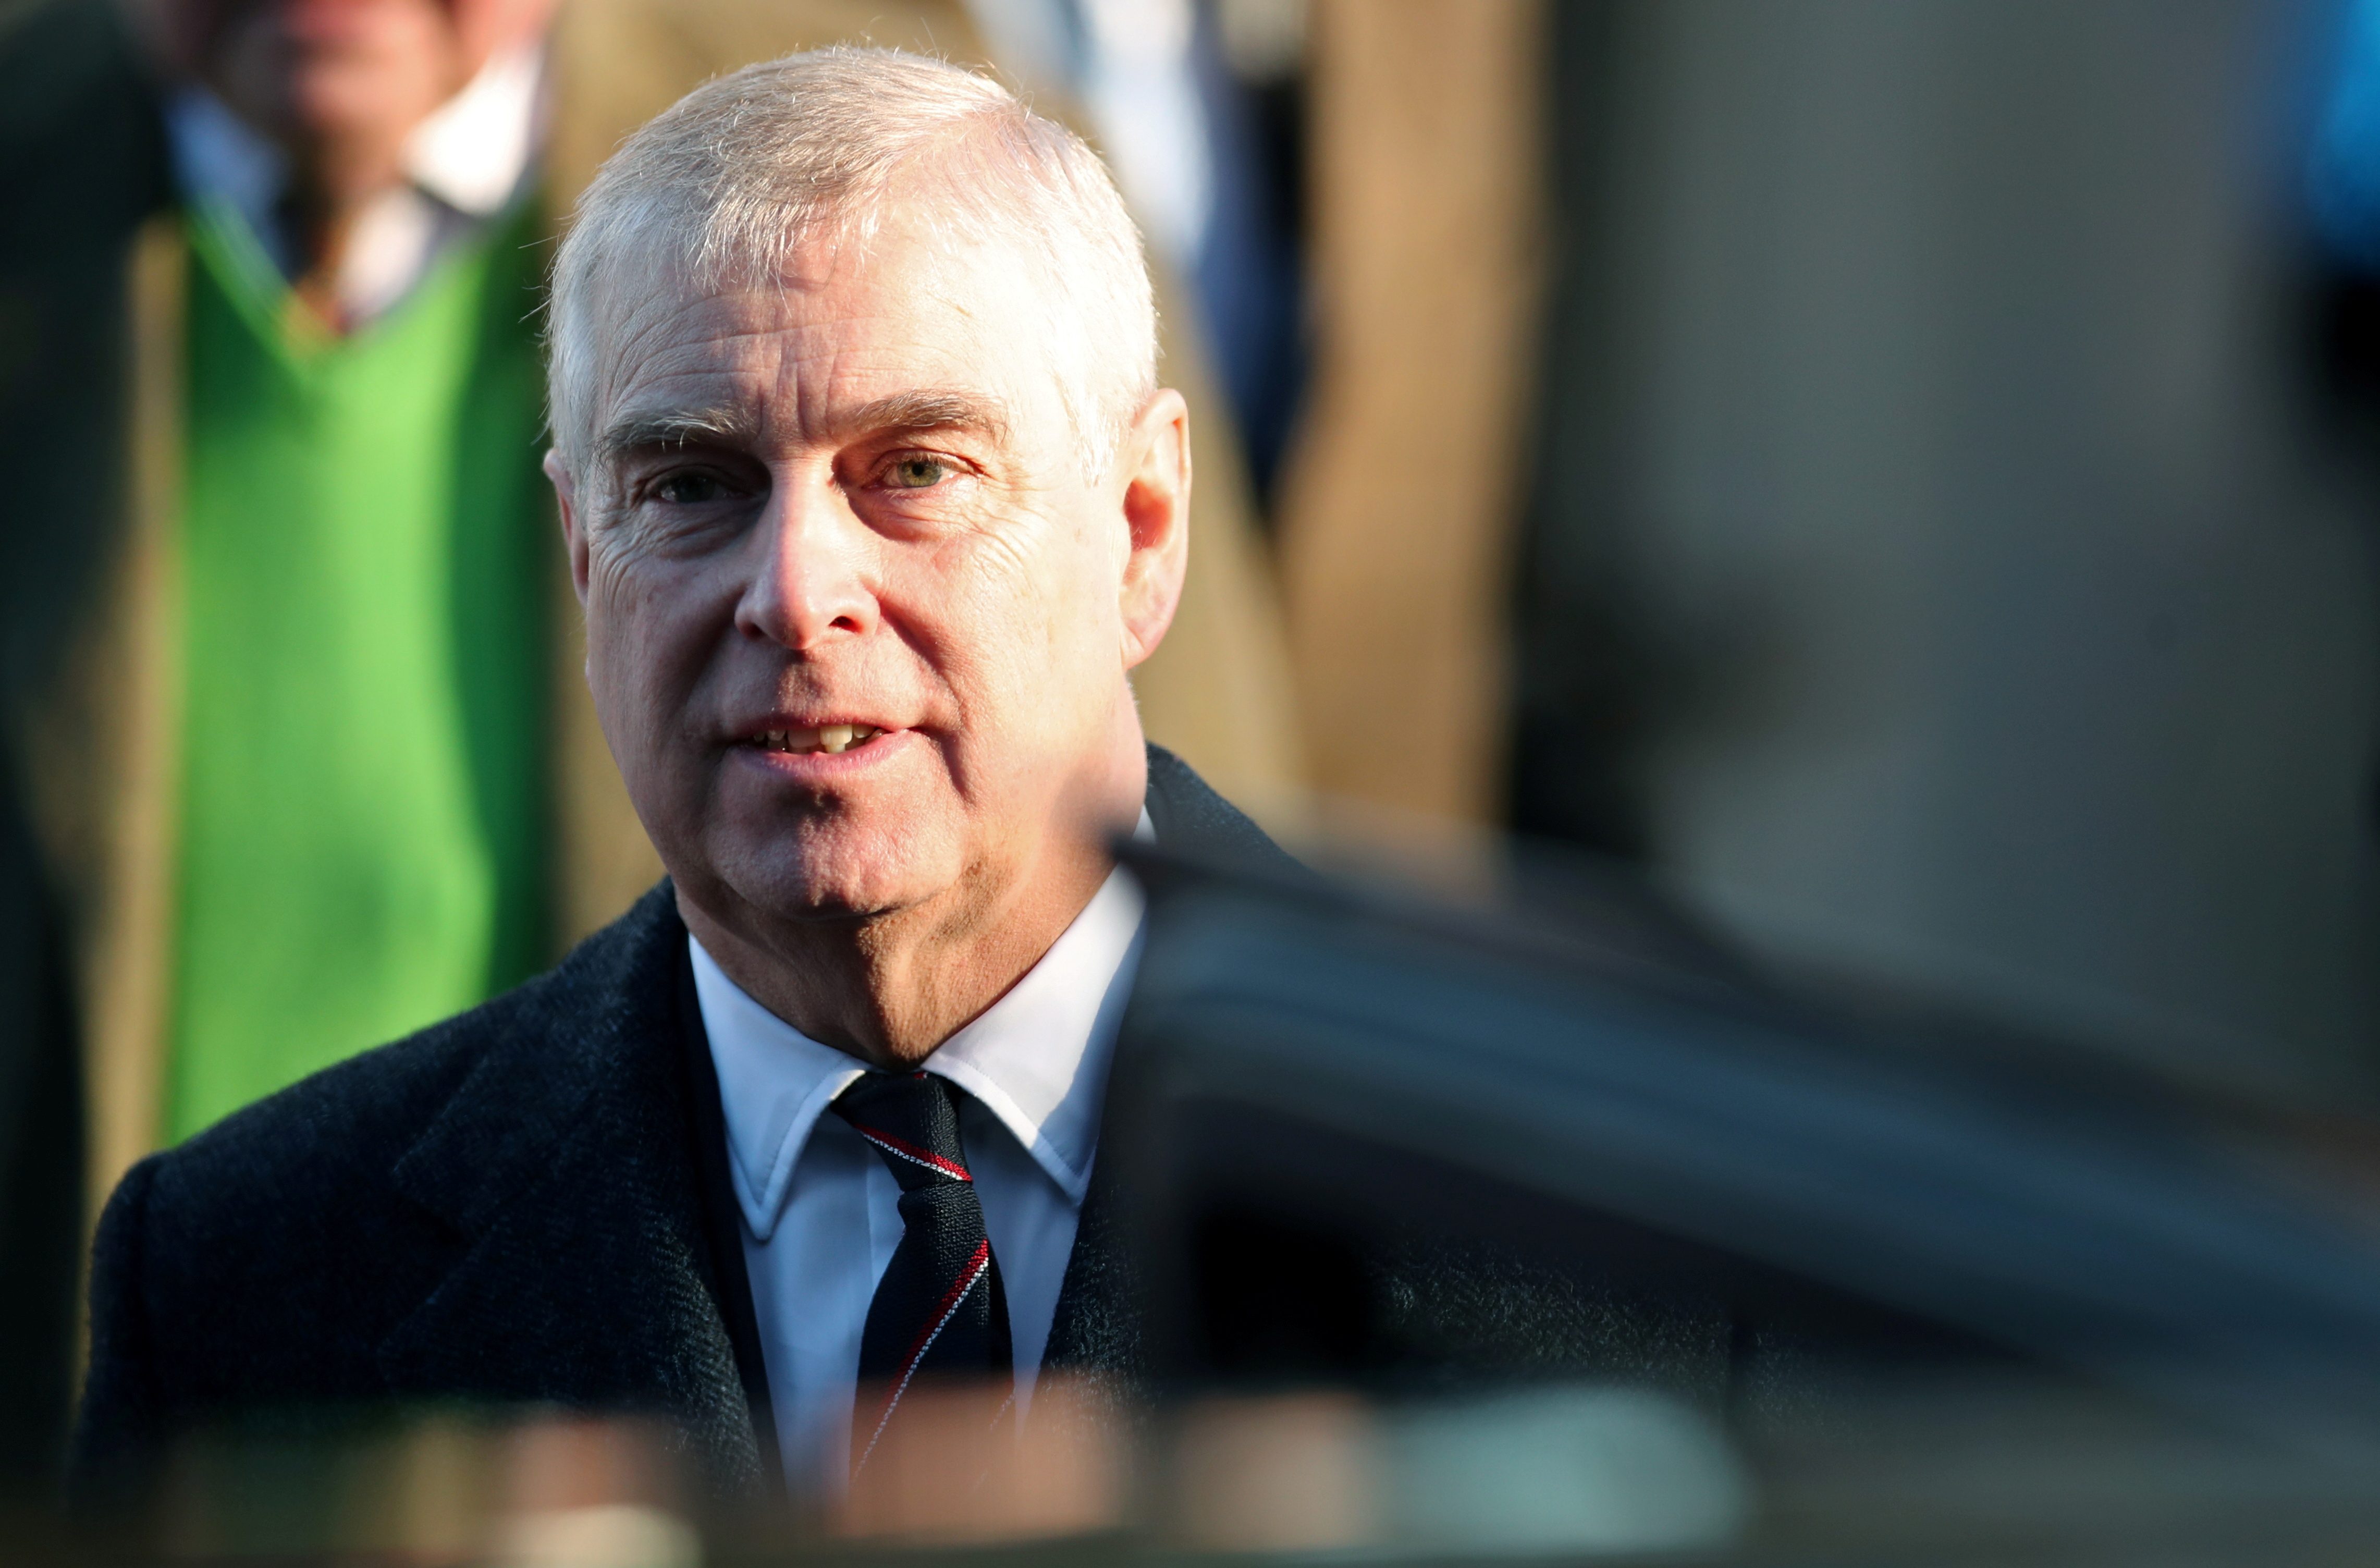 Prince Andrew rejects sexual abuse accuser’s ‘potentially unlawful’ lawsuit – lawyer